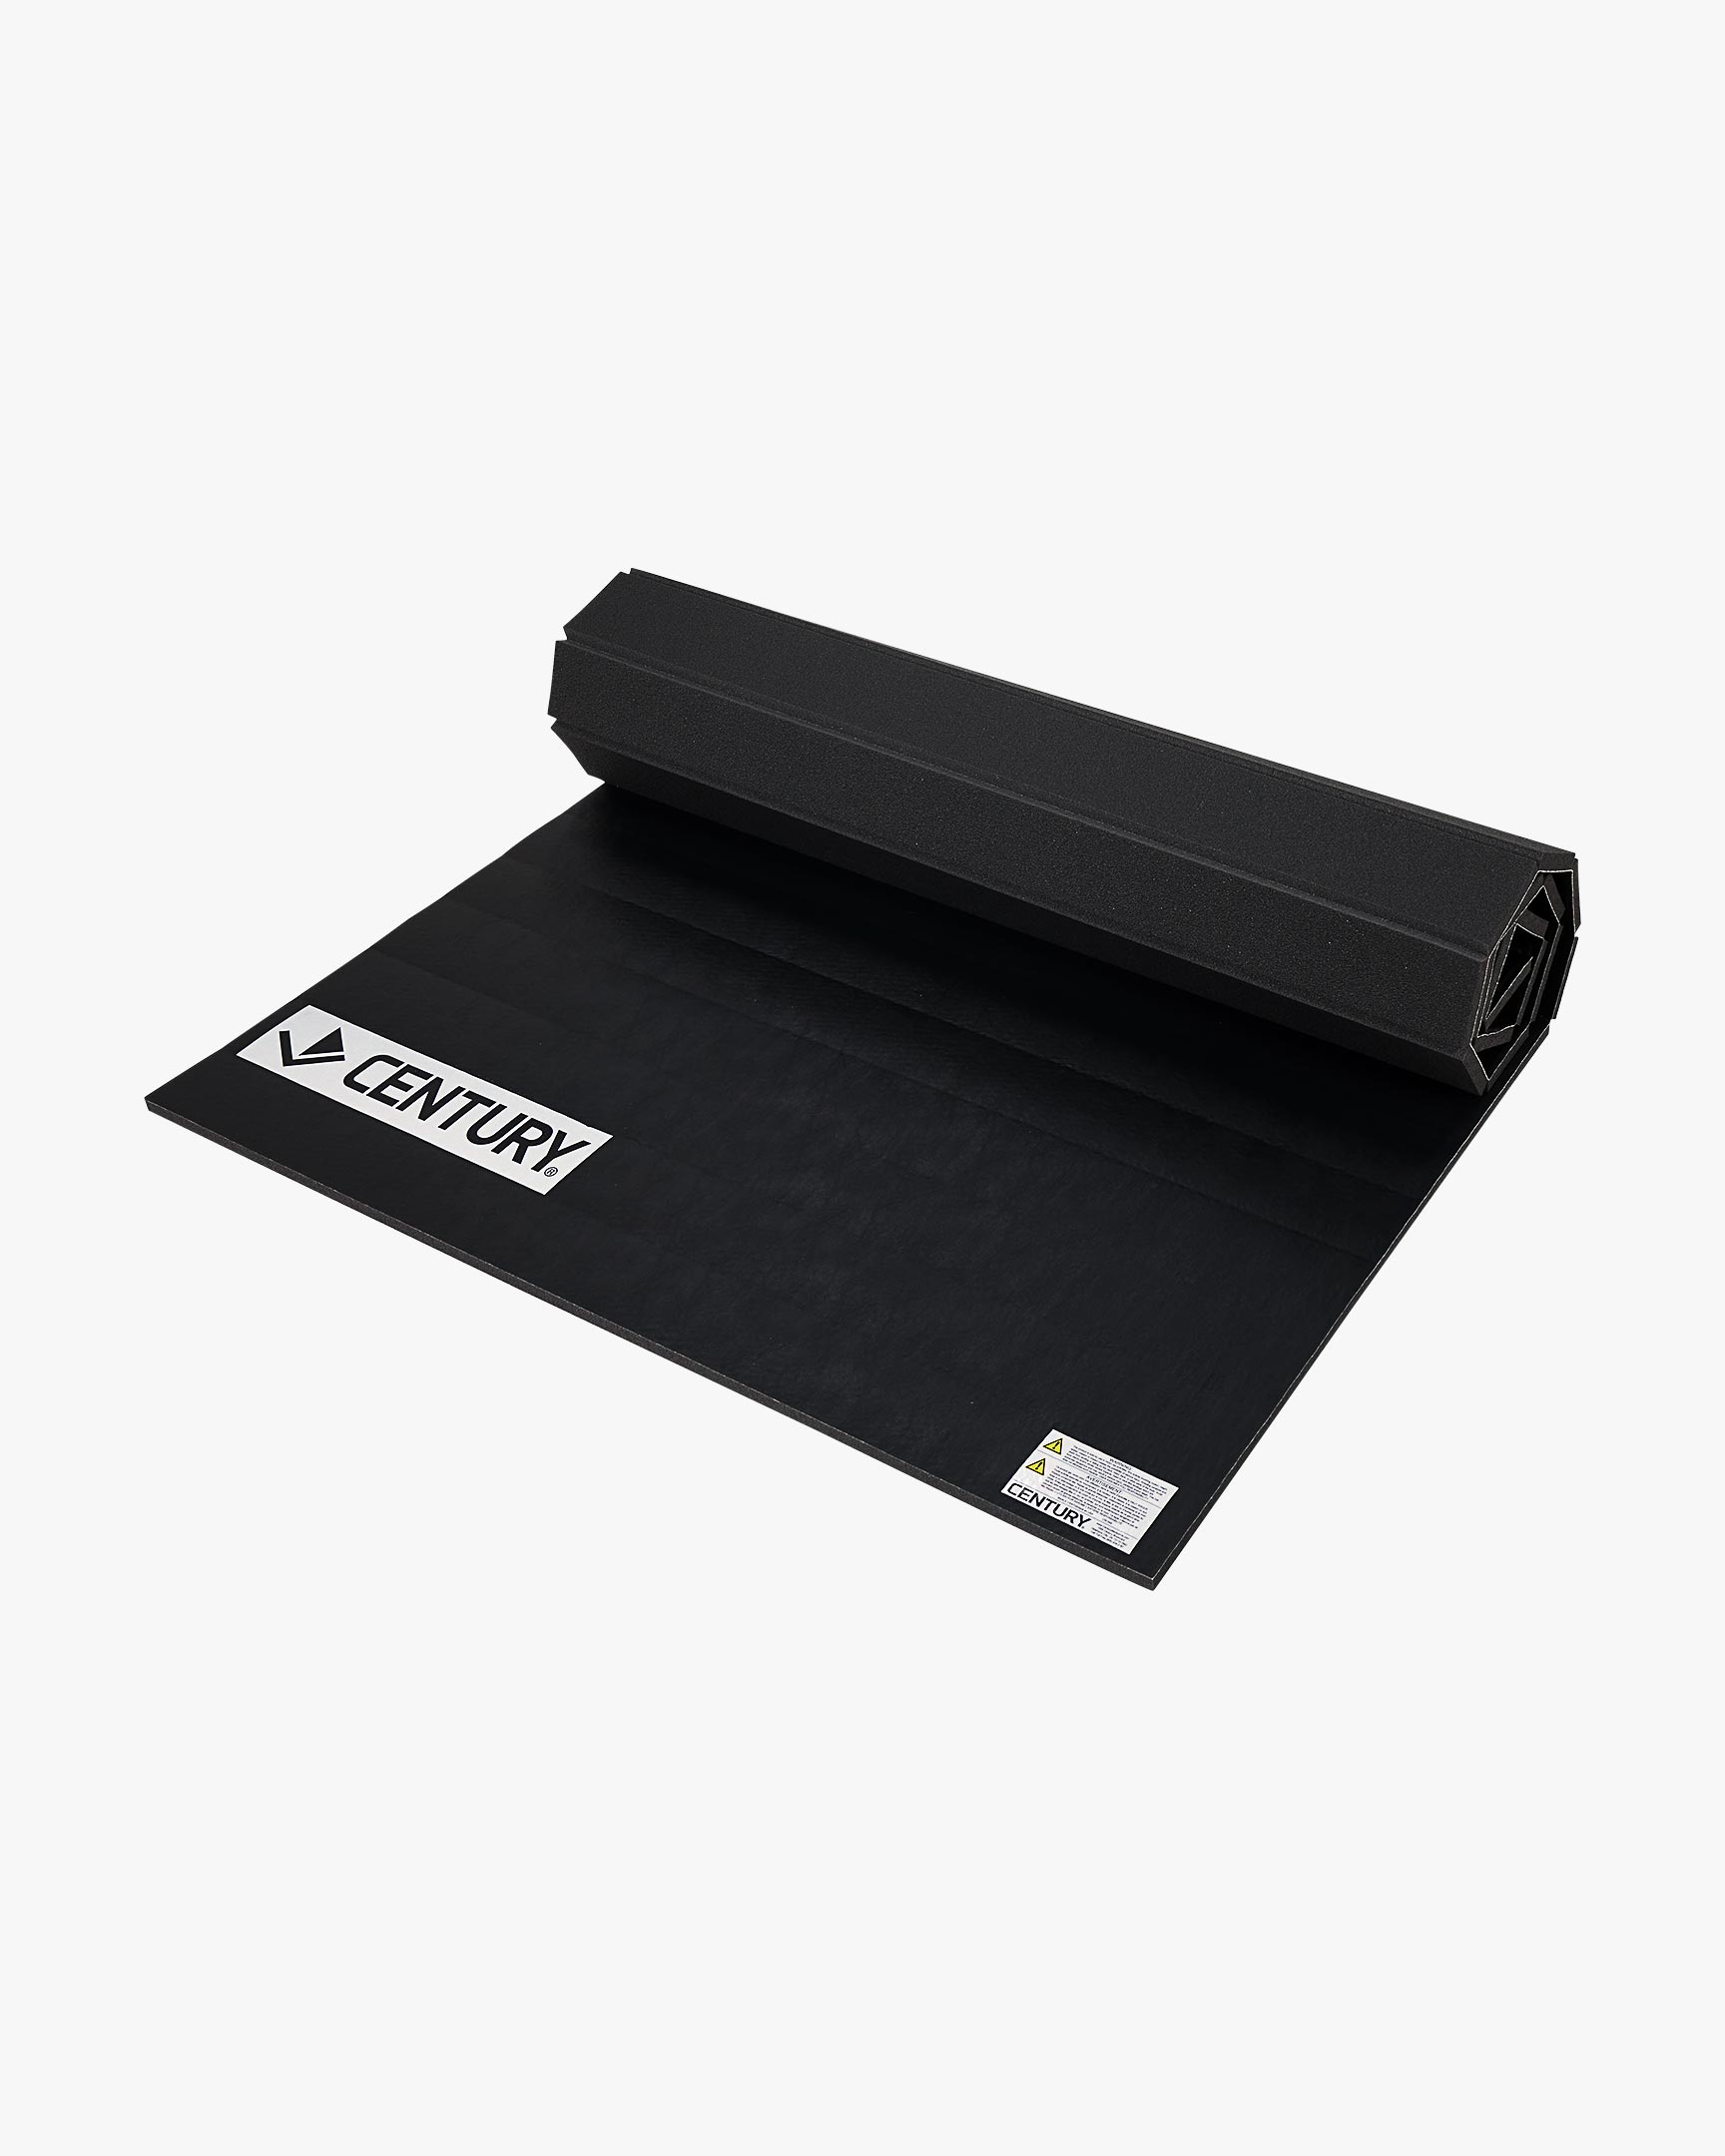 Home Rollout Mat - 4ft x 8ft x .8in Black